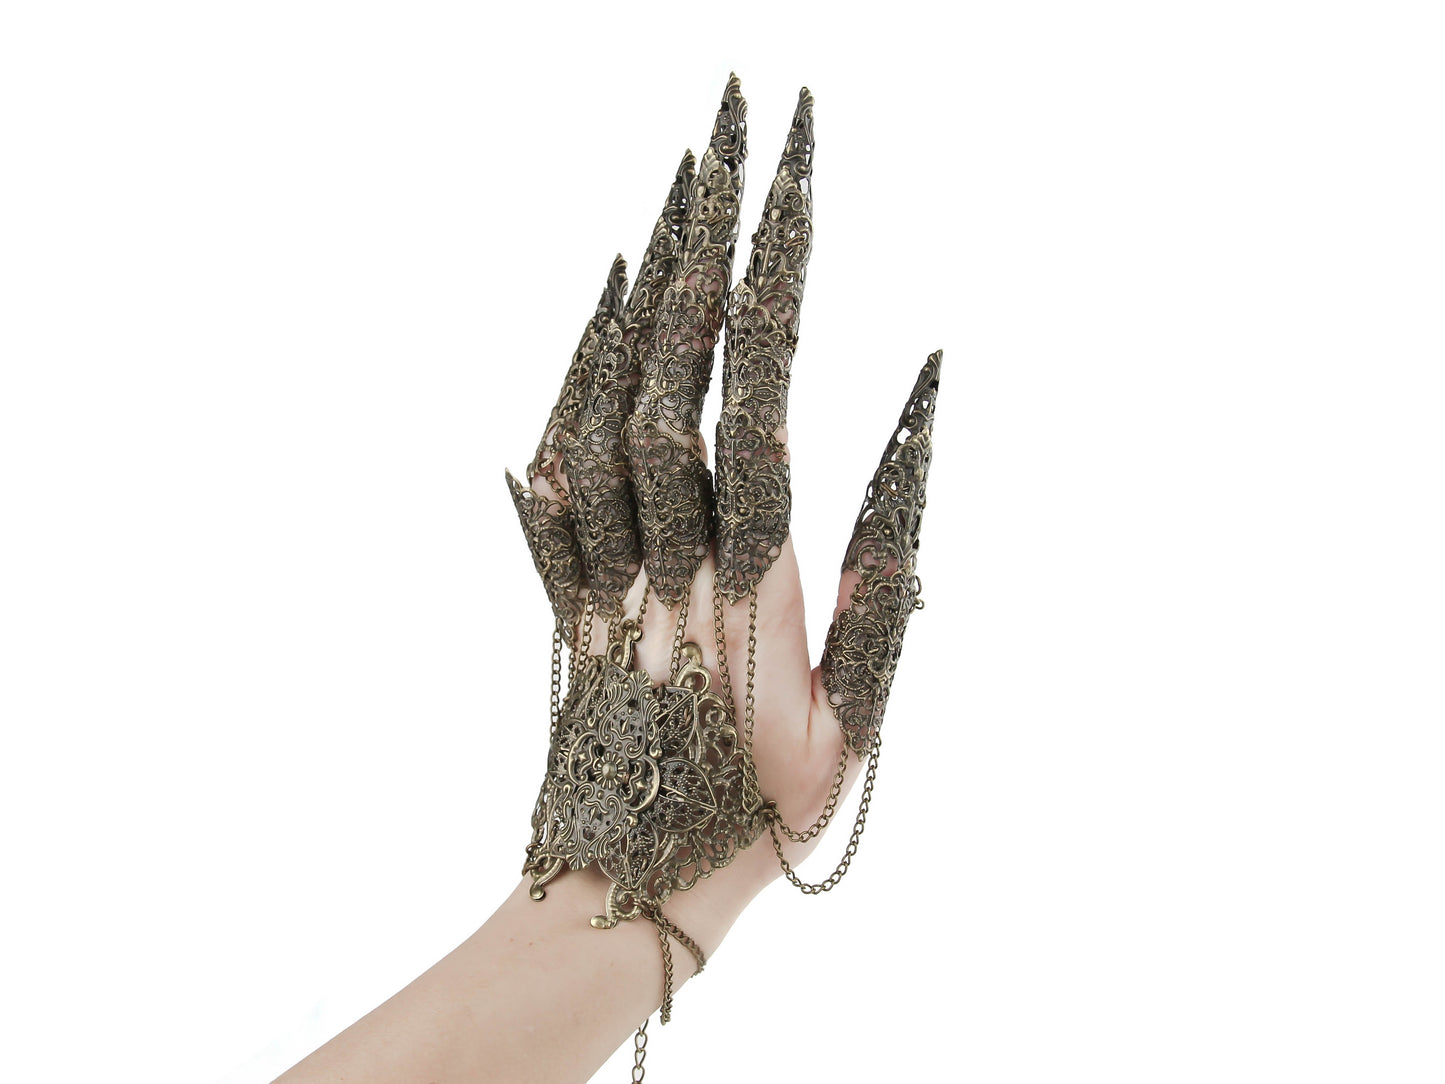 An ethereal display of Myril Jewels' handcrafted bronze lace-like metal finger armor rings, perfect for gothic-chic, witchcore, and whimsigoth enthusiasts. These neo-gothic statement pieces are interconnected with delicate chains, ideal for Halloween or any punk-inspired fashion statement, showcasing the unique artistry of alternative style jewelry.